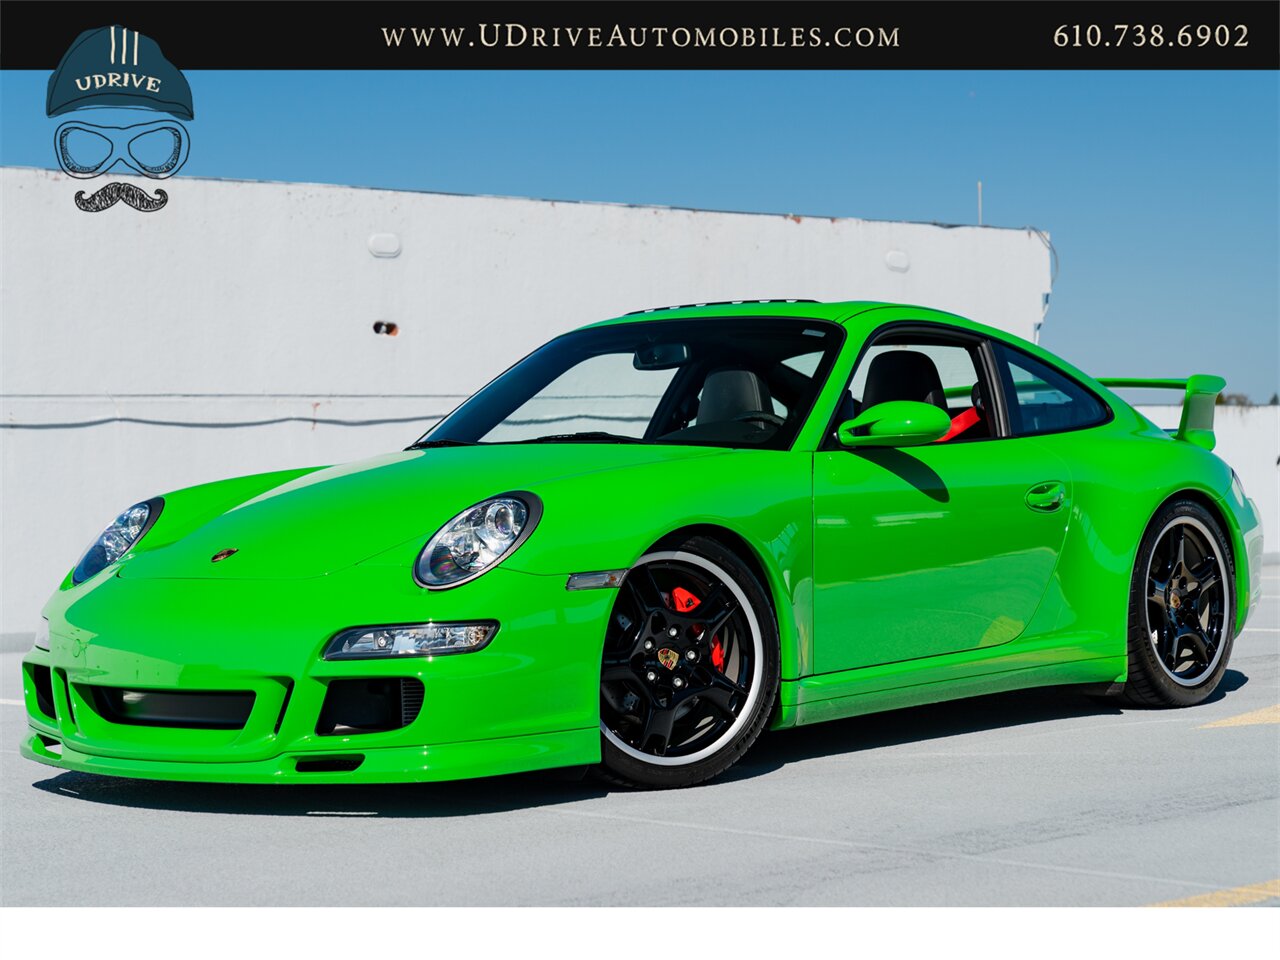 2006 Porsche 911 Carrera 4S  997 PTS Signal Green 6Sp Sport Sts Spt Chrono Spt Exhst - Photo 1 - West Chester, PA 19382